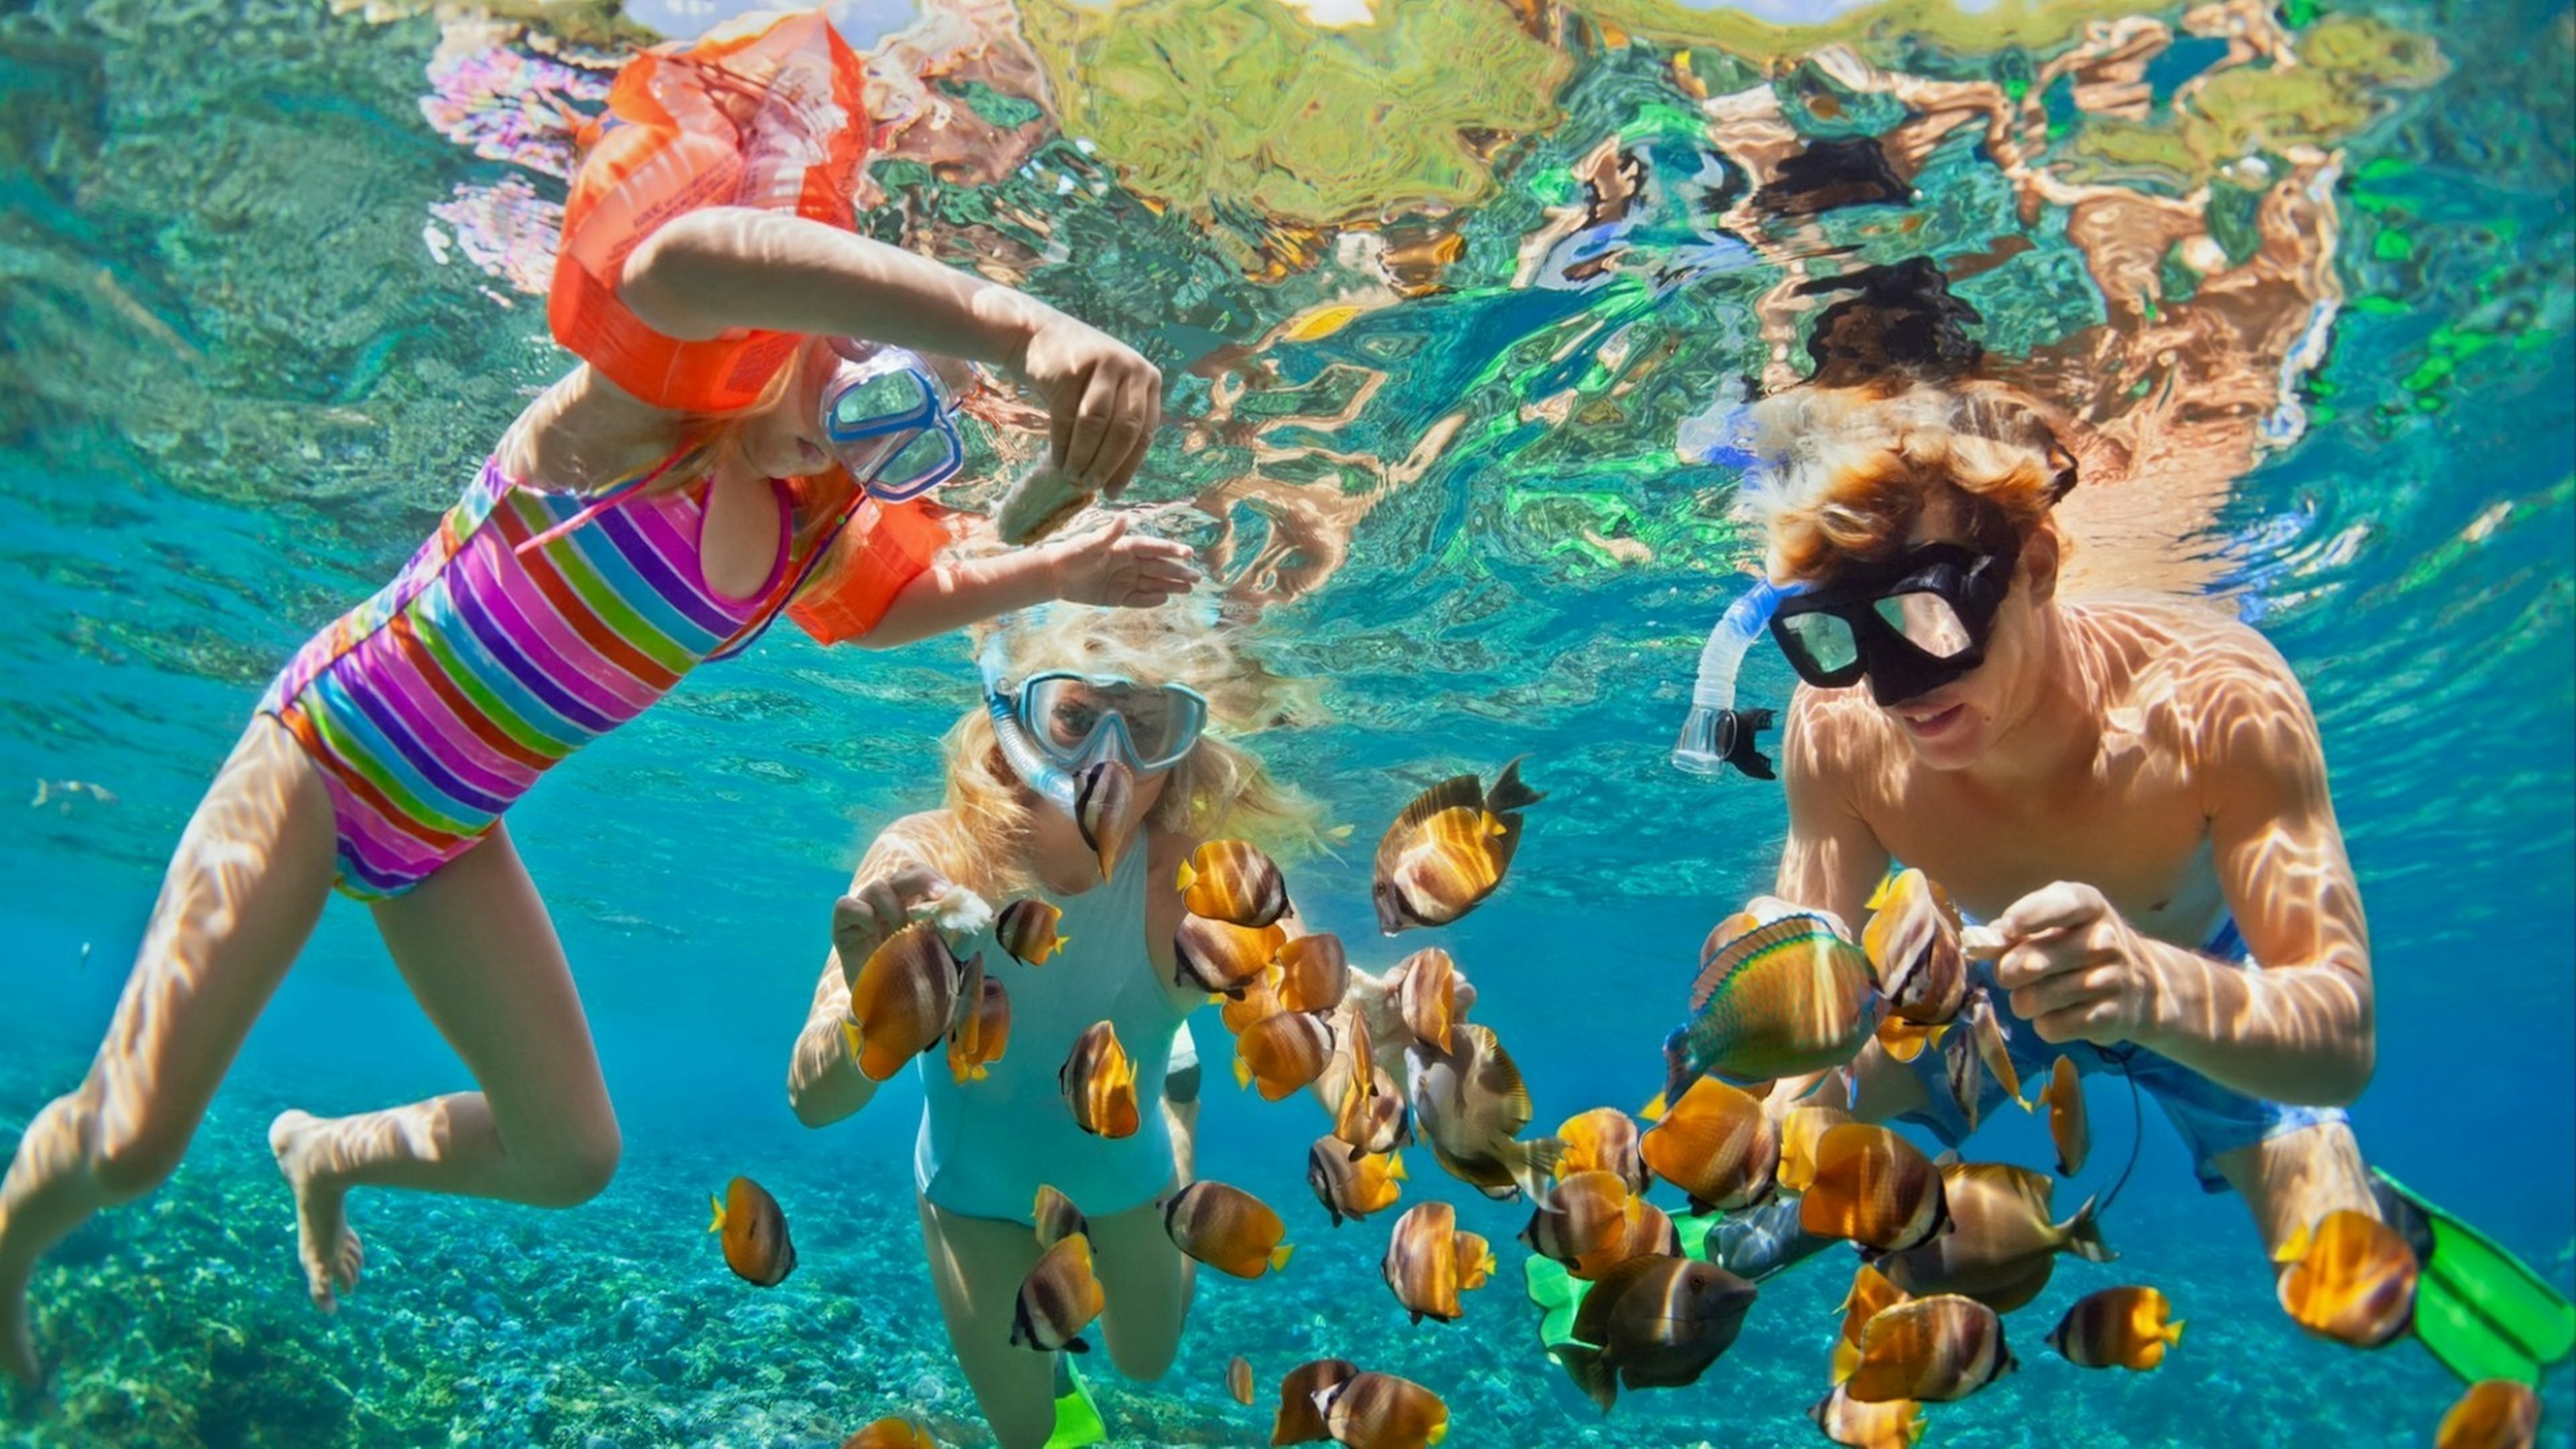 Family fun, snorkeling among tropical fish over a coral reef